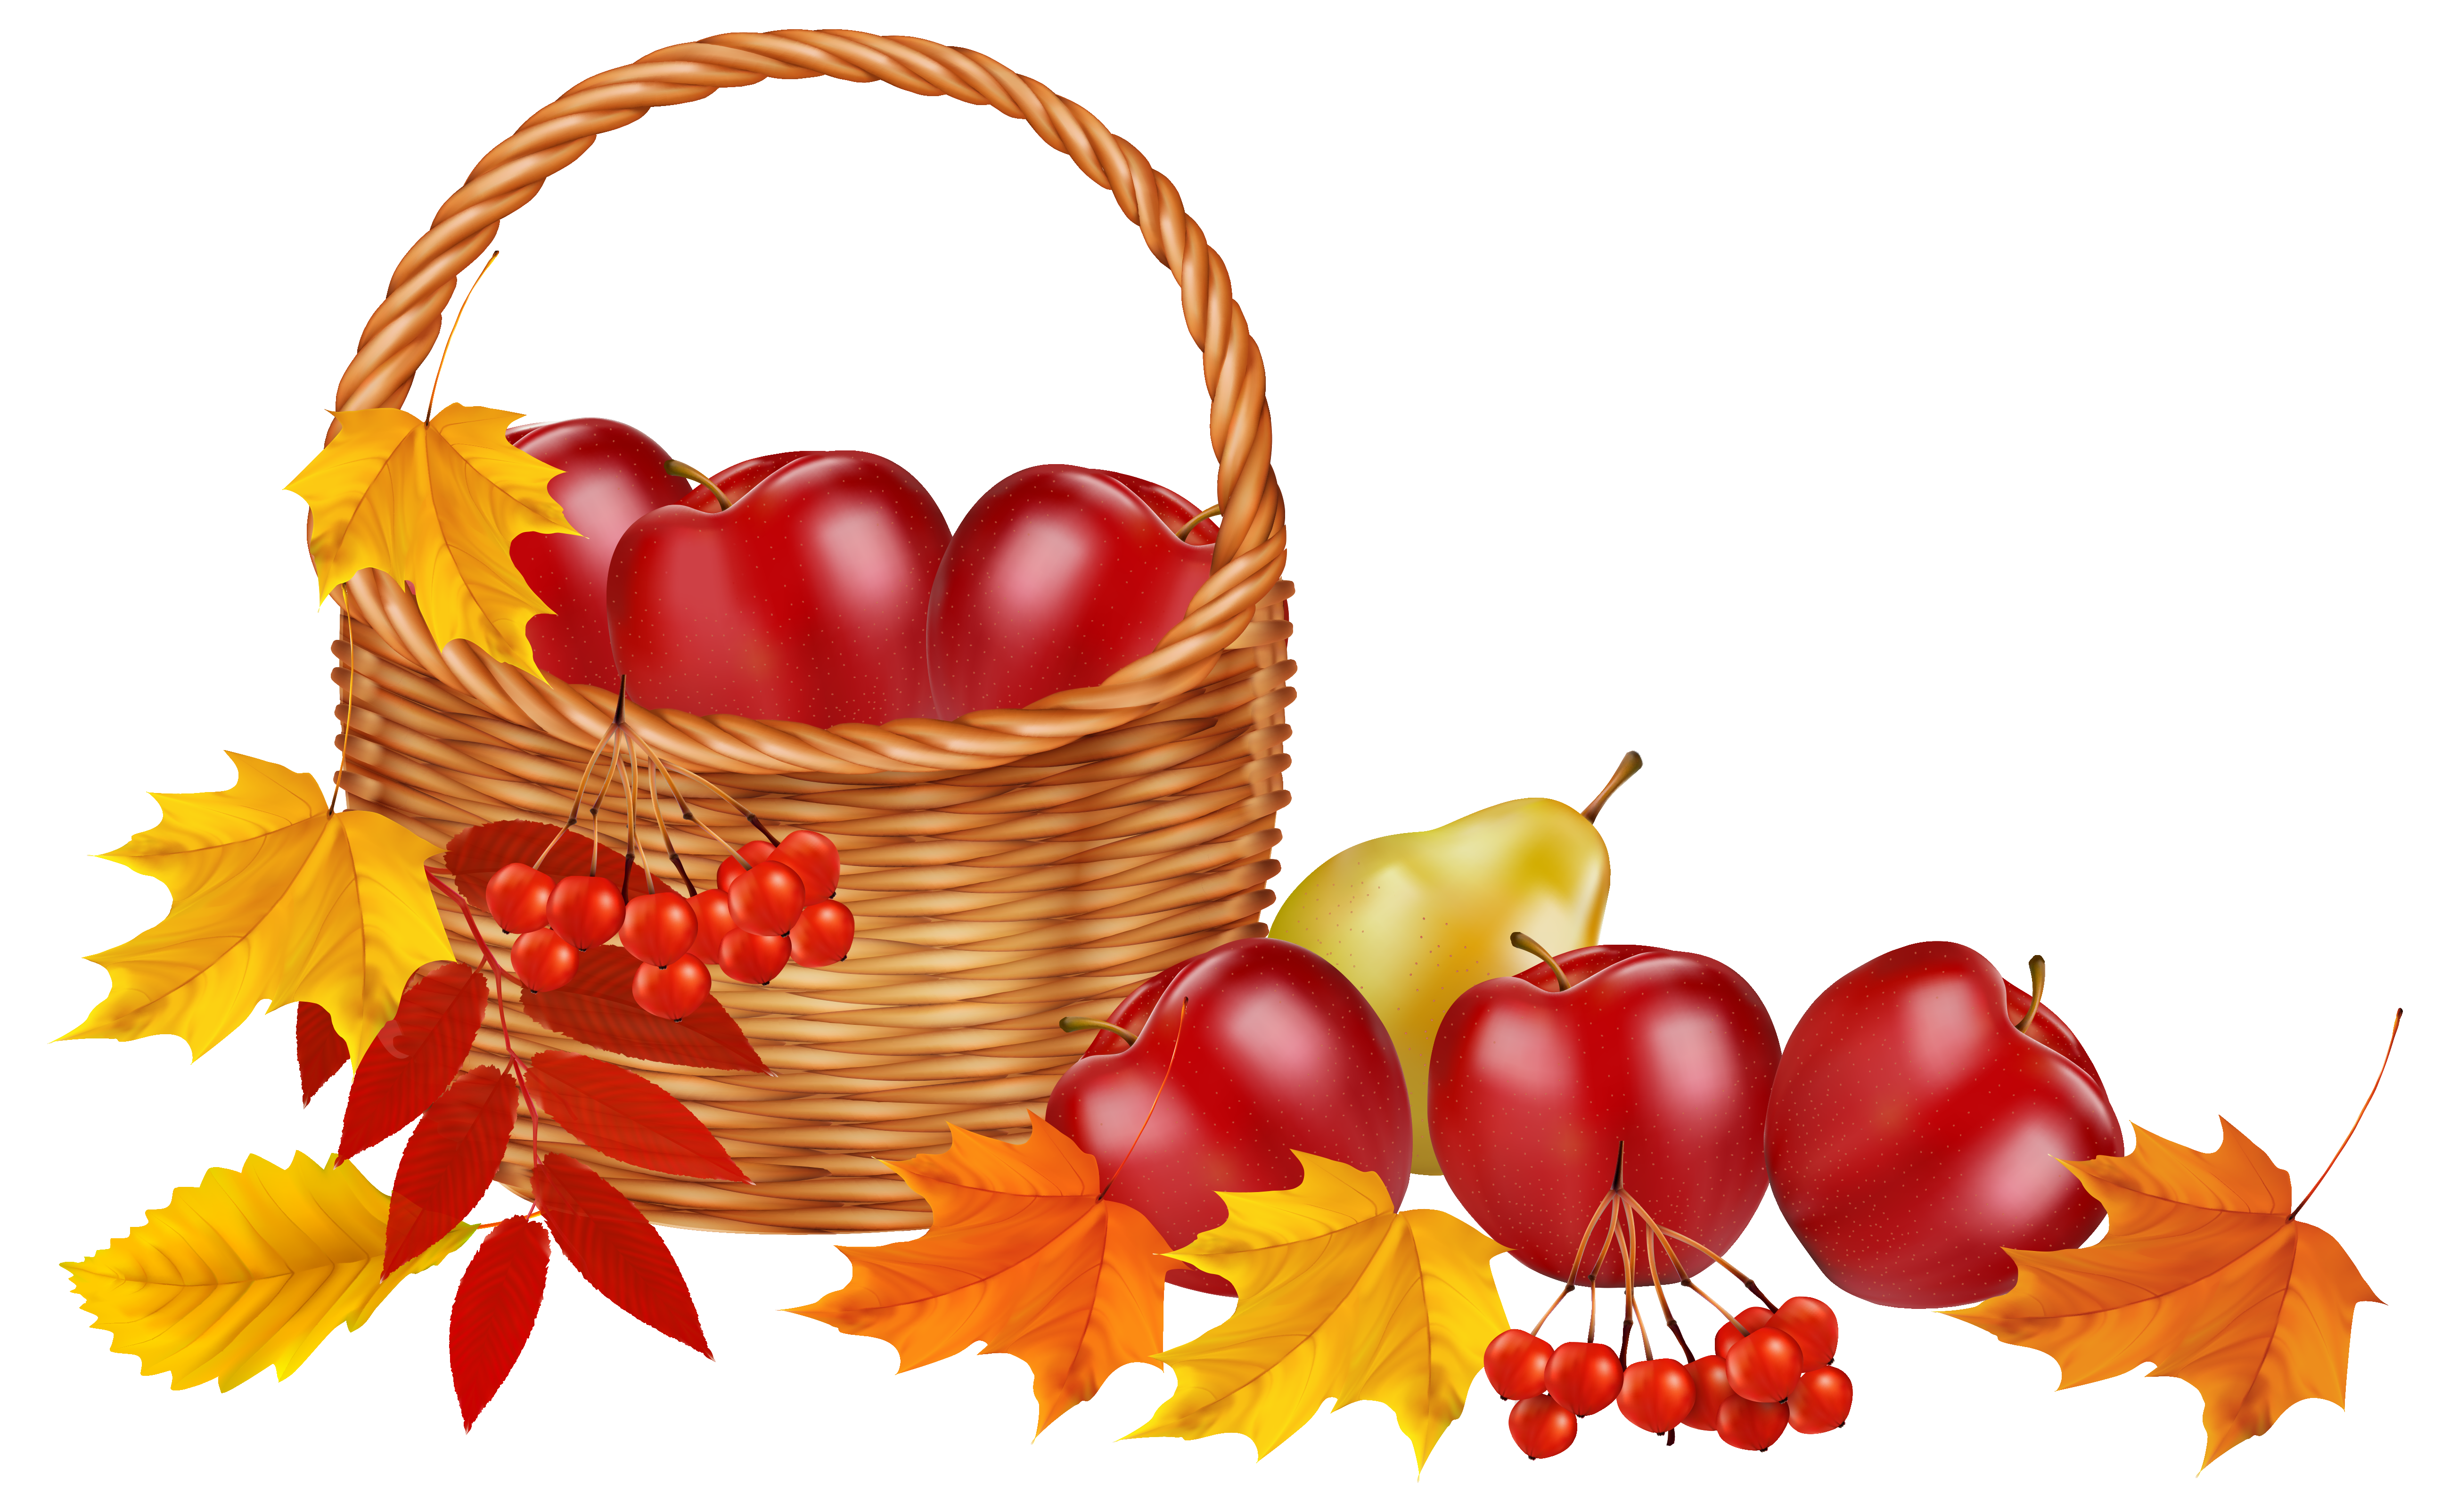 Basket with fruits and Autumn Leaves PNG Clipart Image.